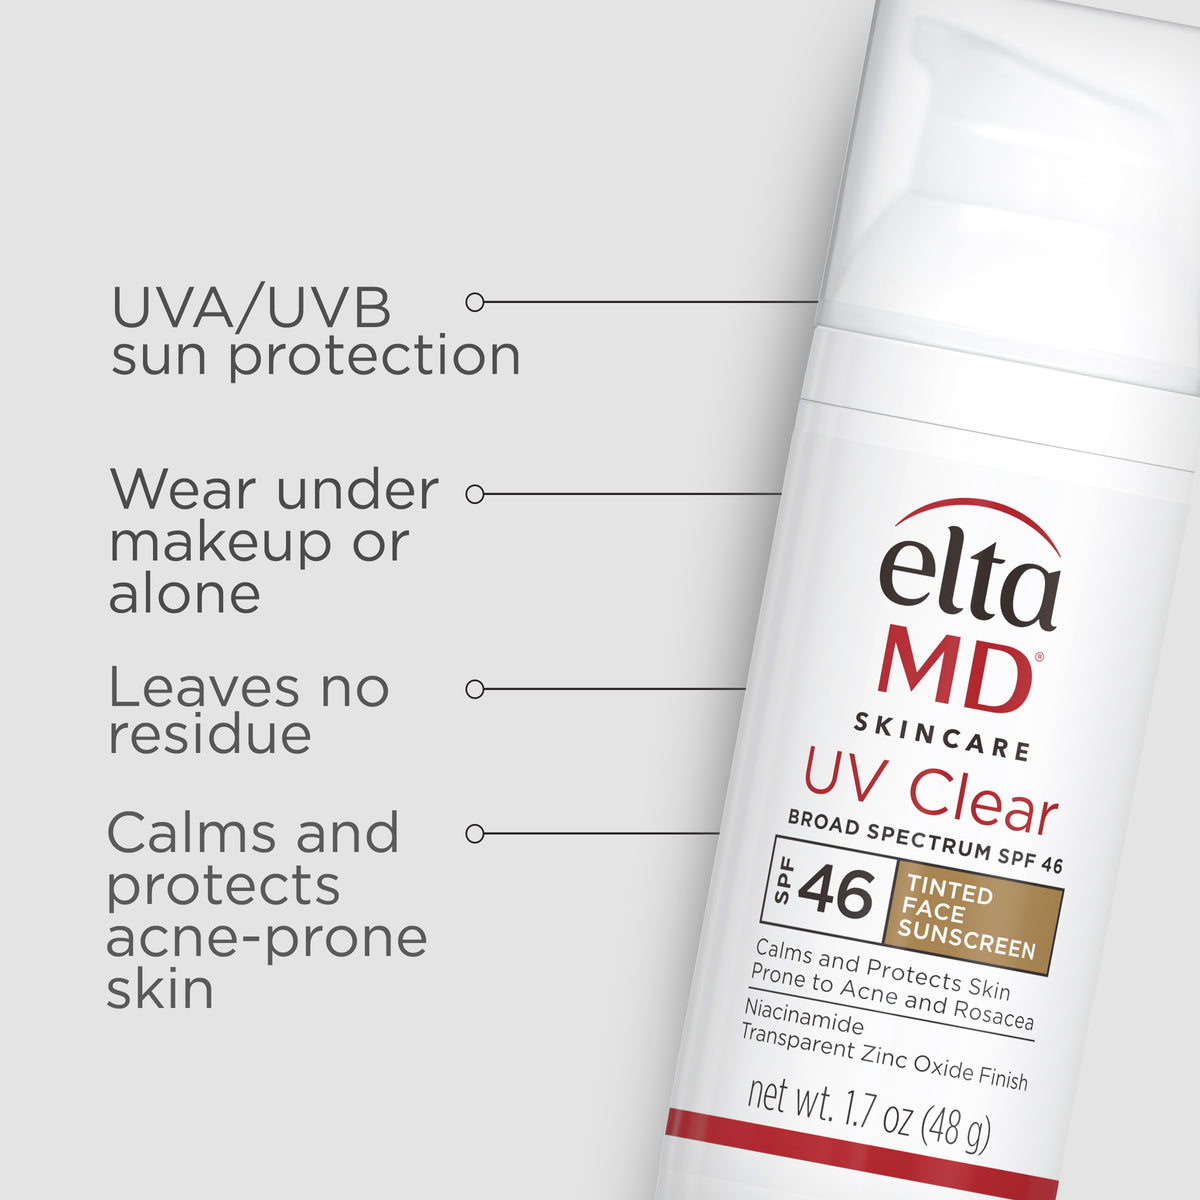 eltaMD UV clear tinted: a sunscreen SPF 46